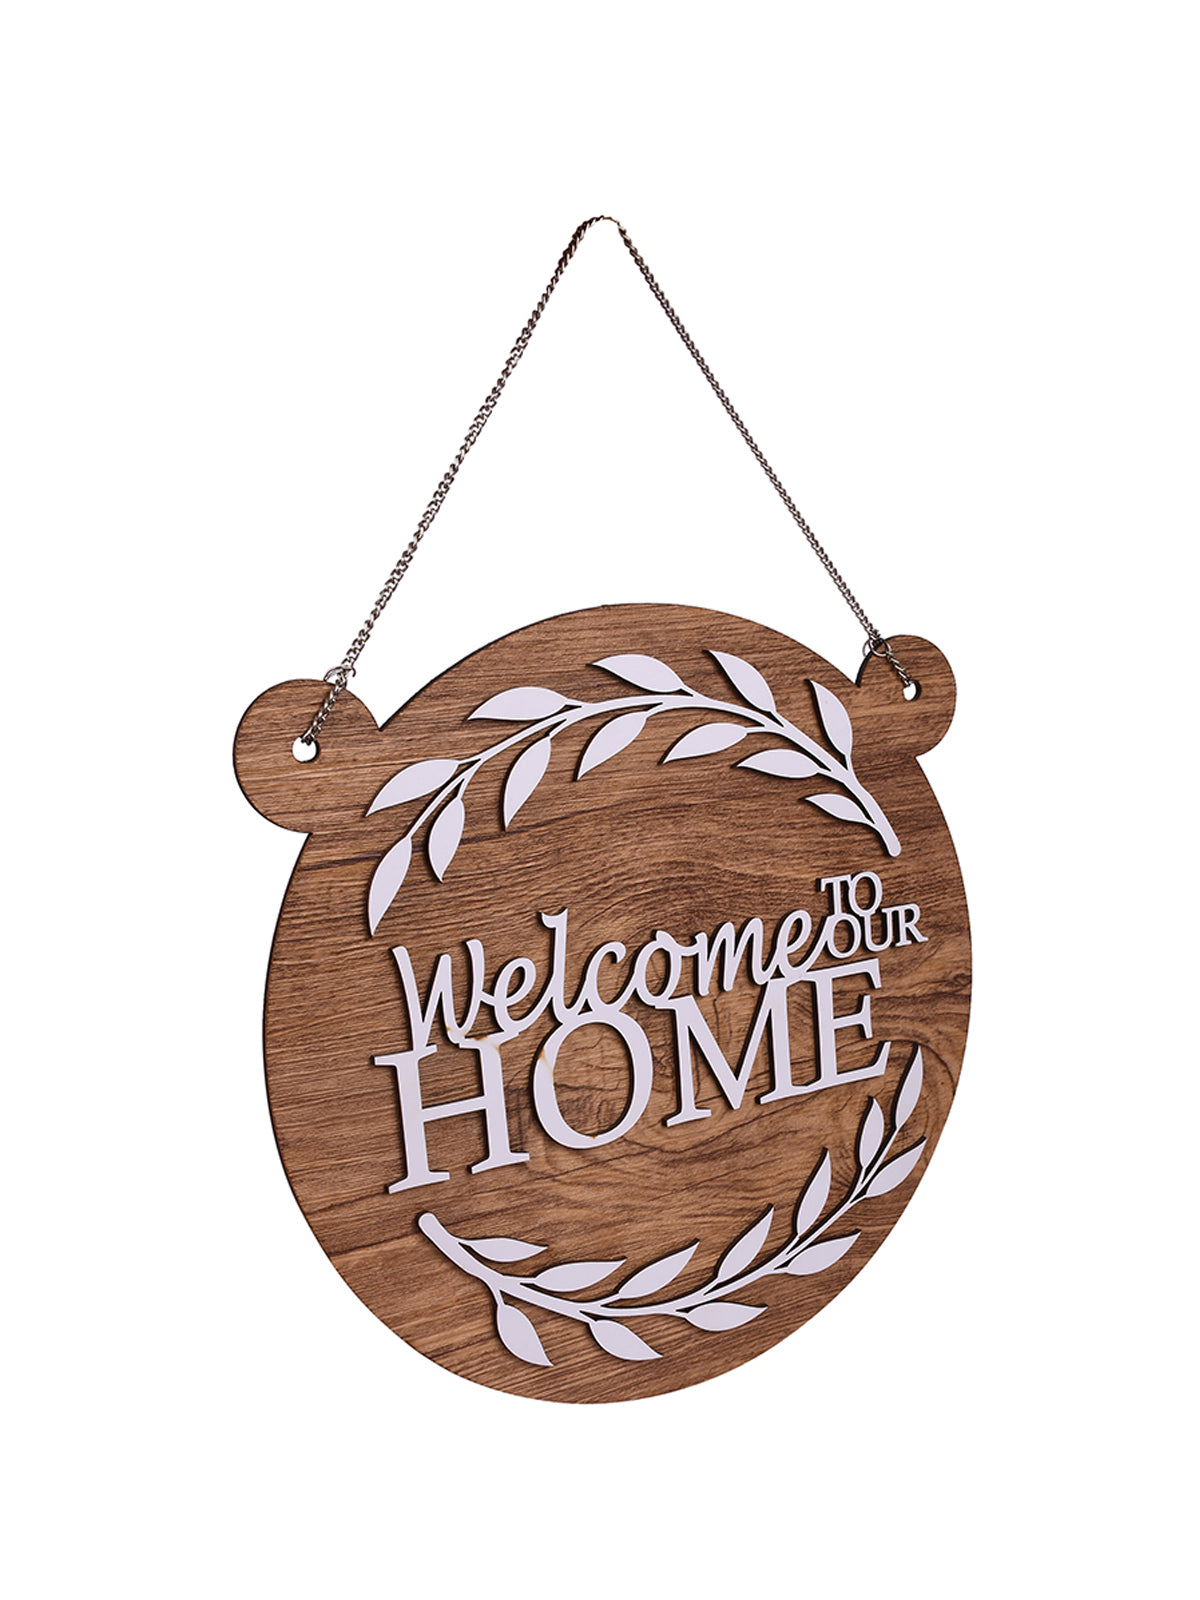 Welcome To Our Home Round with Ear Wooden Wall Hanging